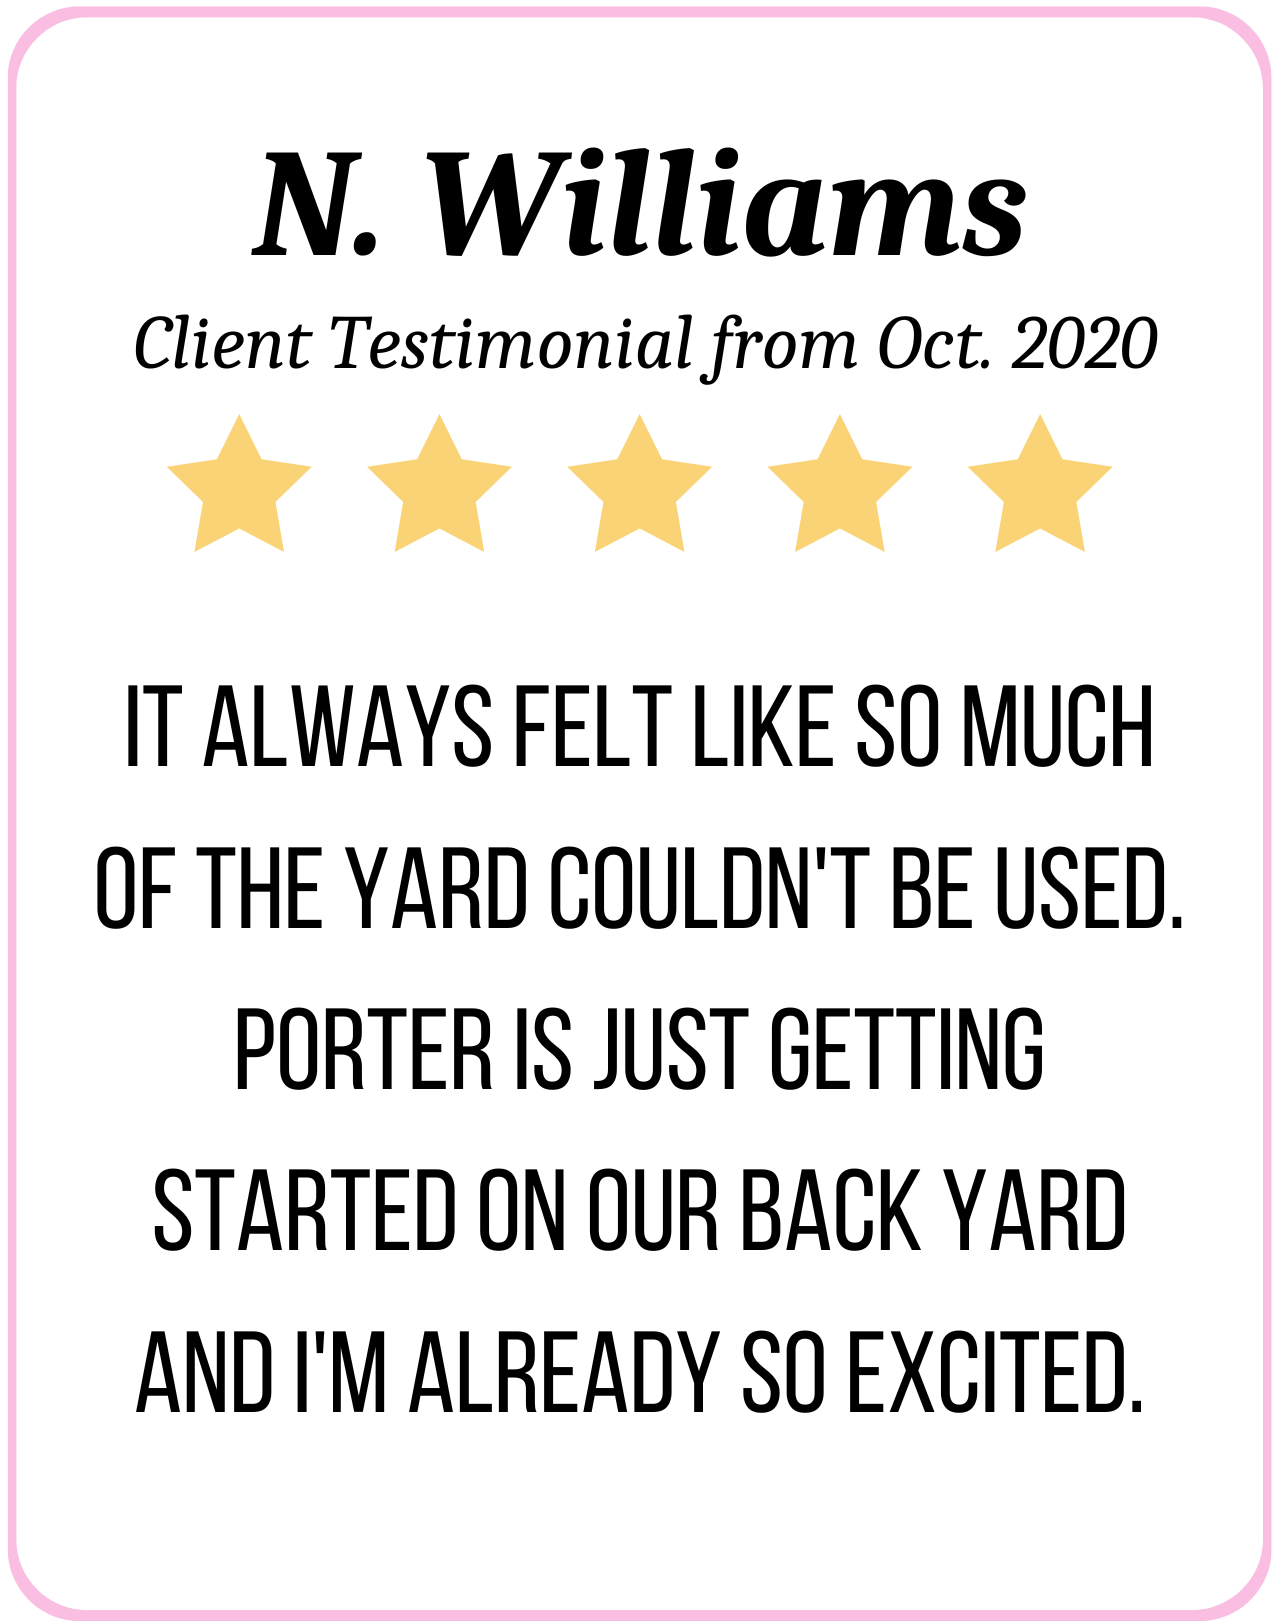 5 Stars: It always felt like so much of the yard couldn't be used. Porter is just getting started on our back yard and I'm already so excited. - N. Williams Oct. 2020